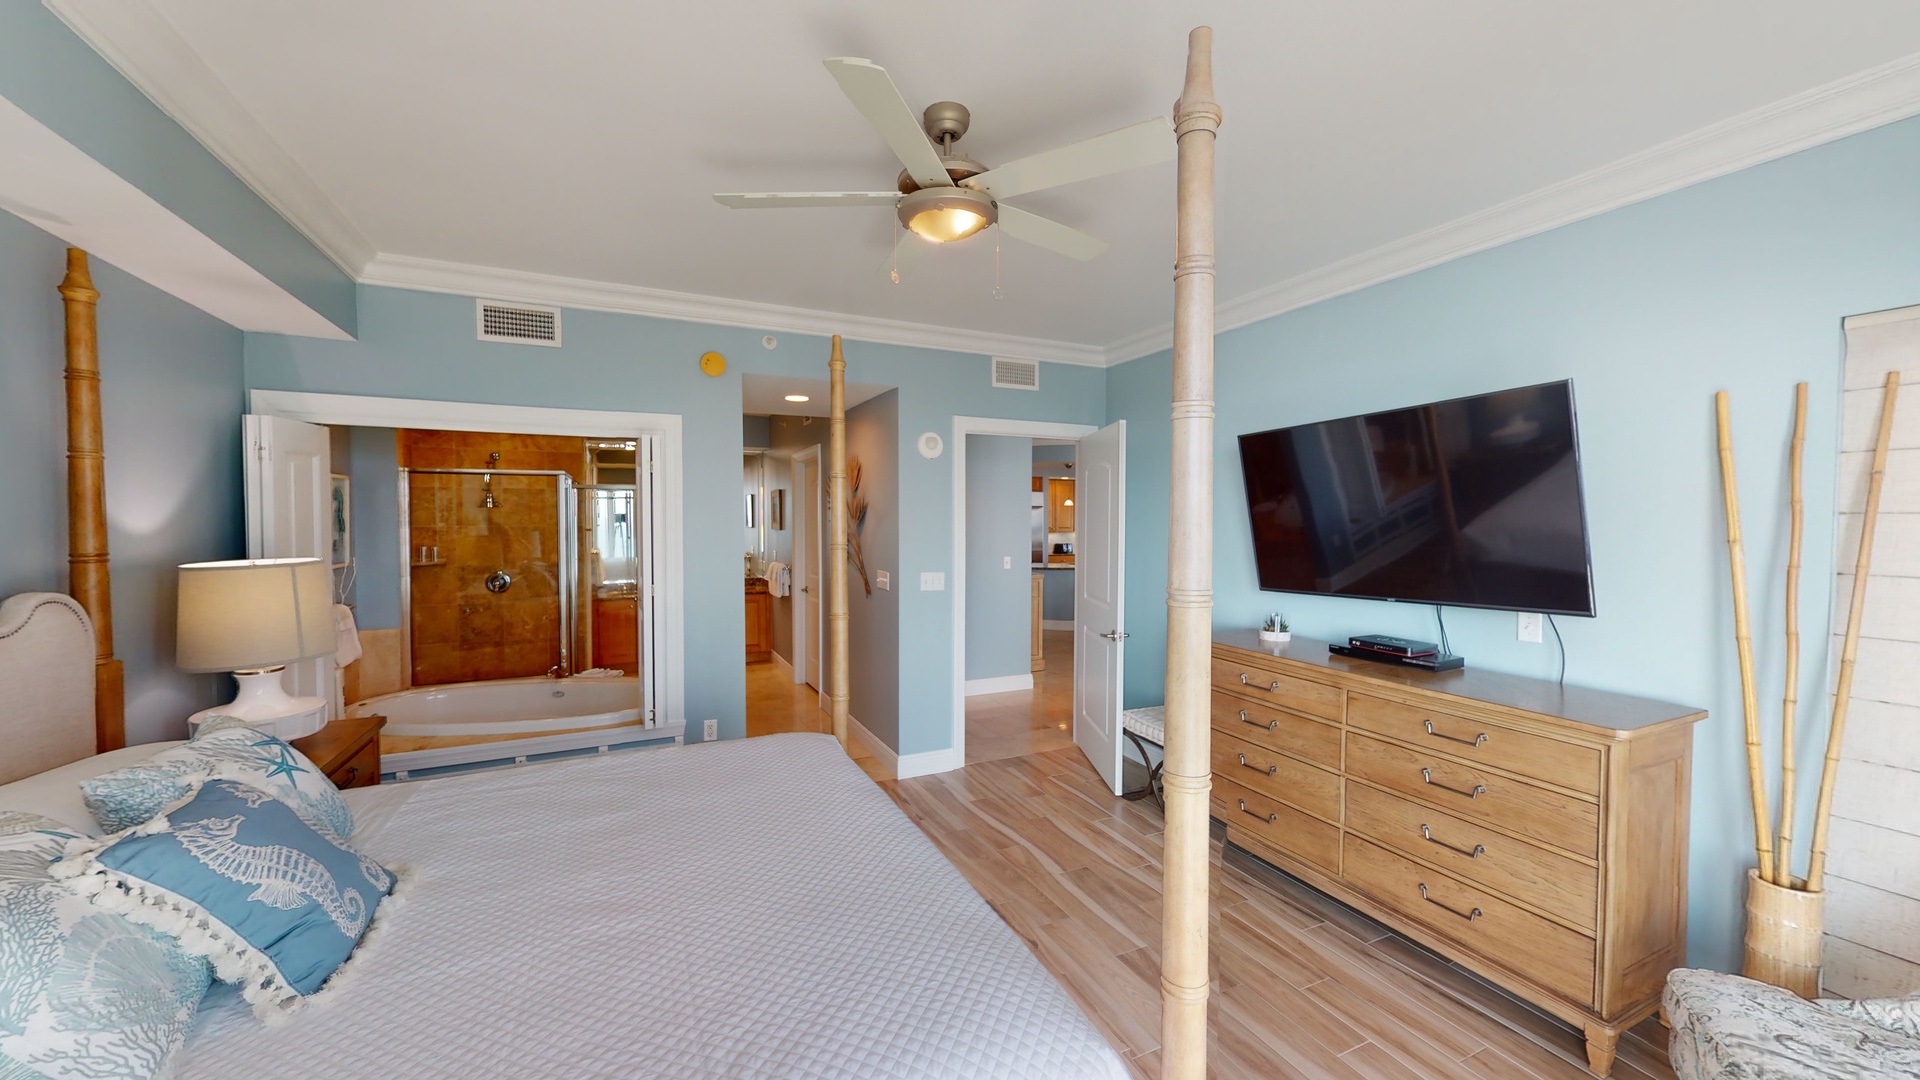 Master bedroom features large TV and master bath